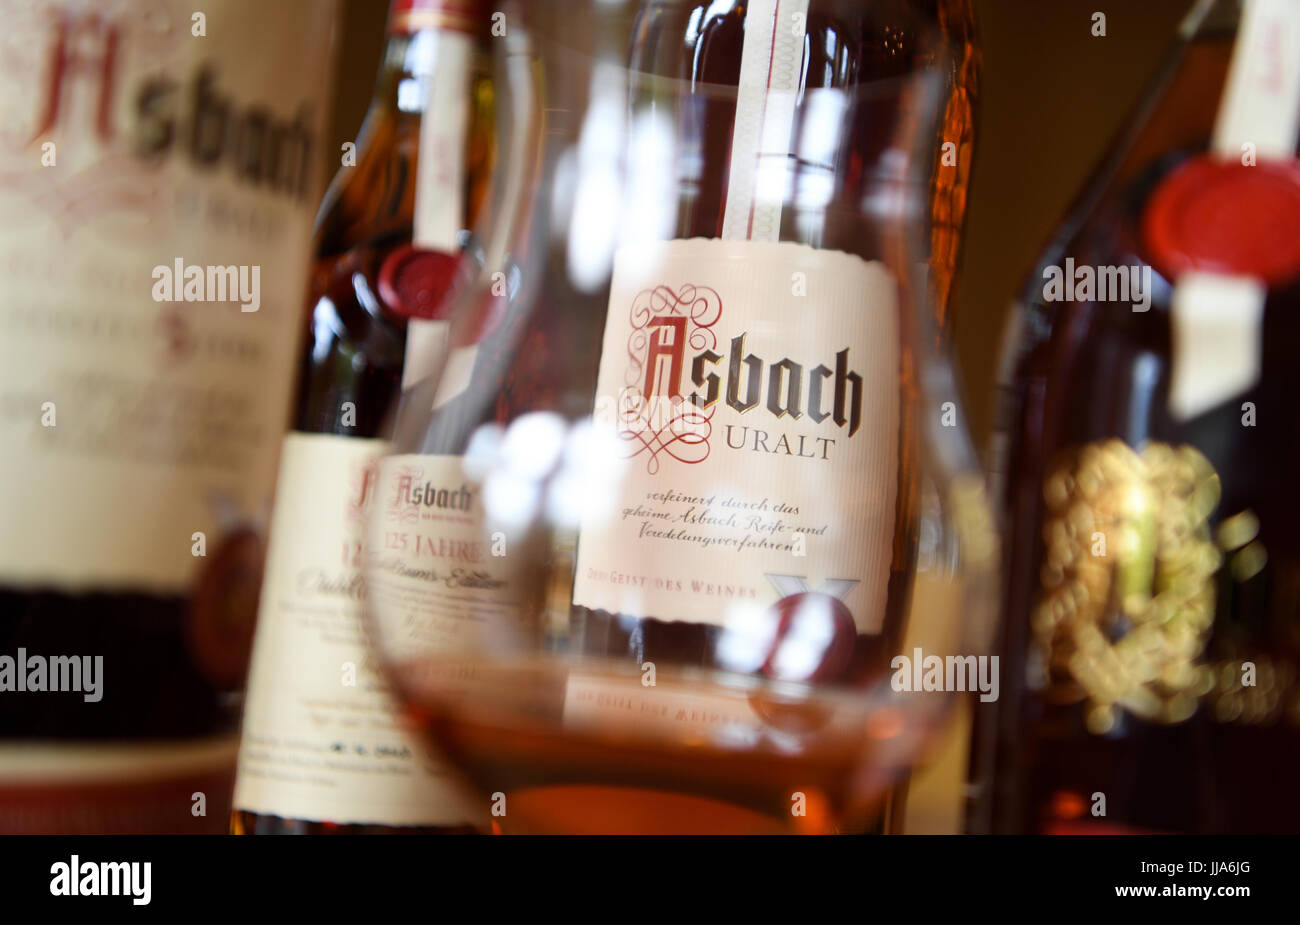 Ruedesheim, Germany. 30th June, 2017. ILLUSTRATION - A bottle reading 'Asbach Uralt' can be seen through a glass with brandy at the Asbach brandy distillery in Ruedesheim, Germany, 30 June 2017. Whether as a praline, in typical Ruedesheimer coffee or pure in a bulbous glass: The brandy of Asbach Uralt can be found at every corner in Ruedesheim. The distillery was founded 125 years ago. Photo: Arne Dedert/dpa/Alamy Live News Stock Photo